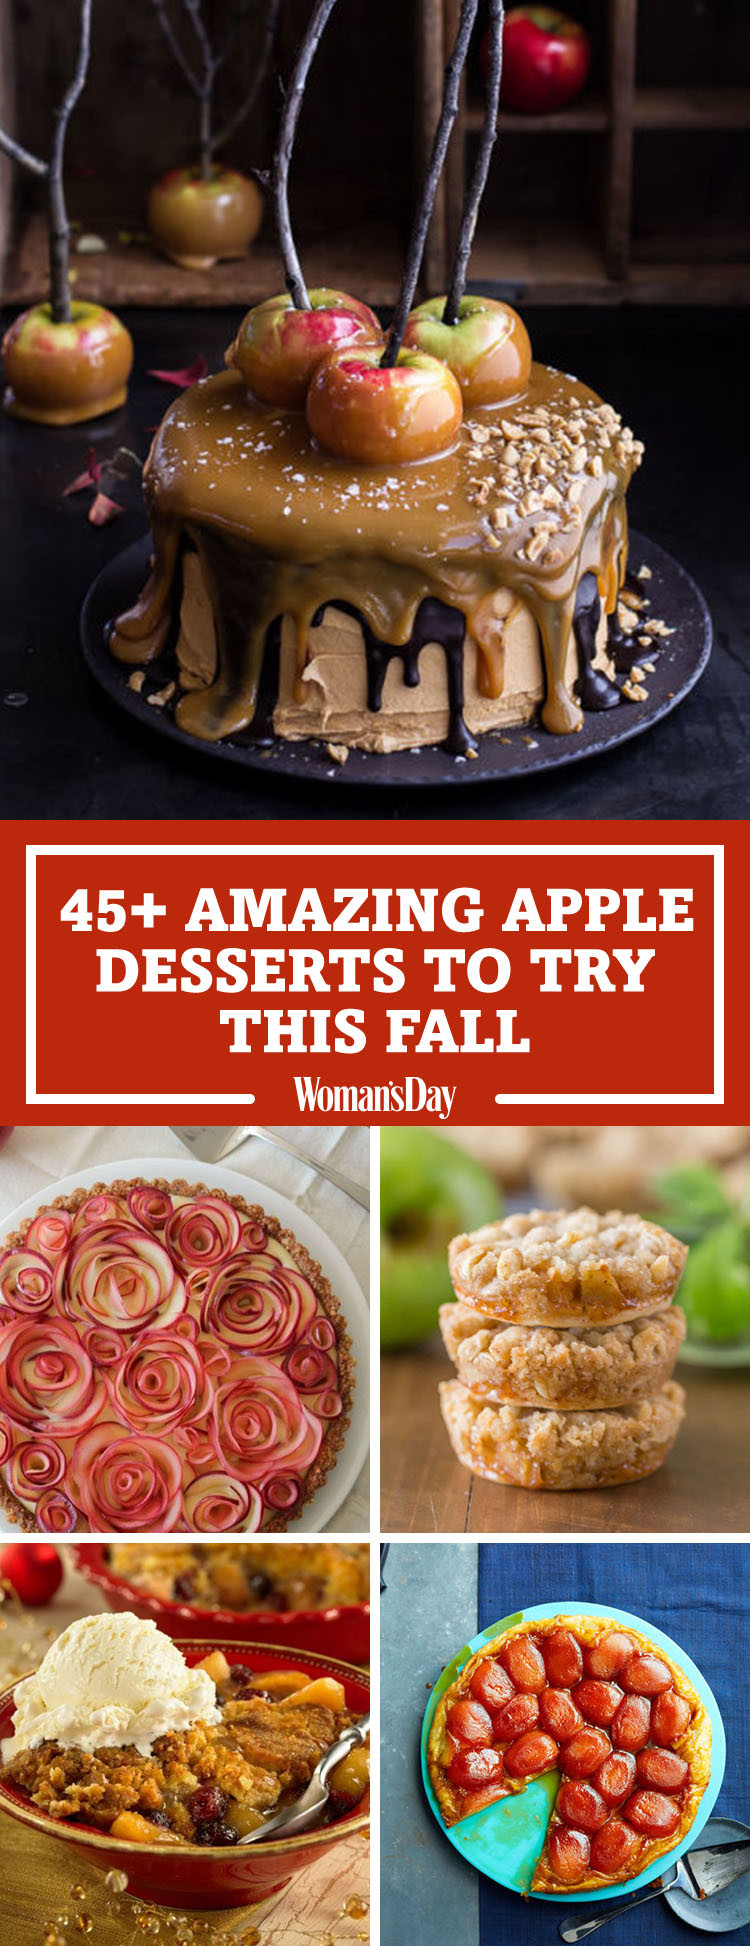 Fall Apple Desserts
 50 Easy Apple Desserts for Fall Best Recipes for Apple